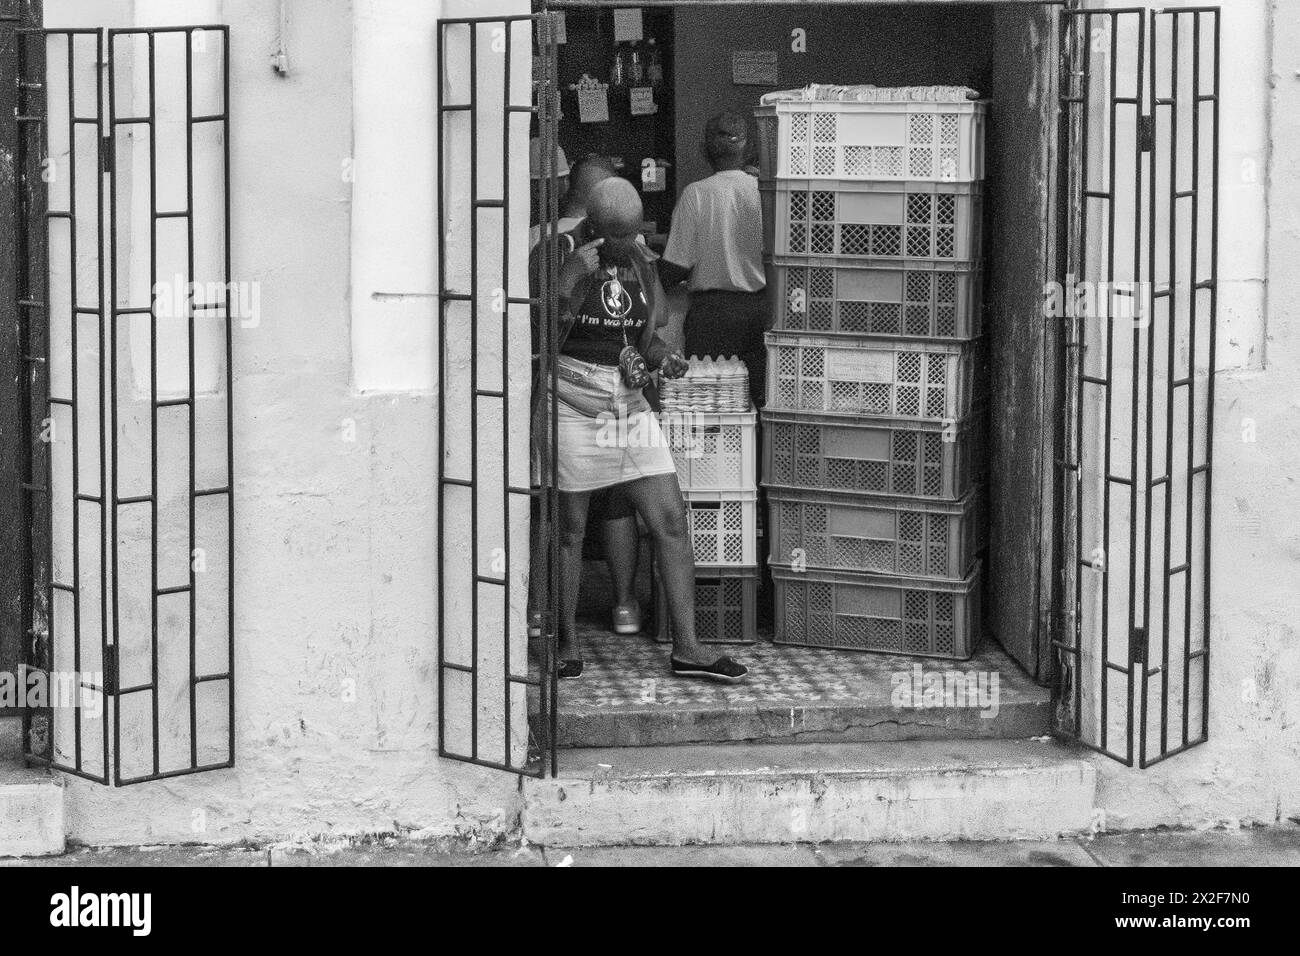 Cuban person leaving a ration book store Stock Photo